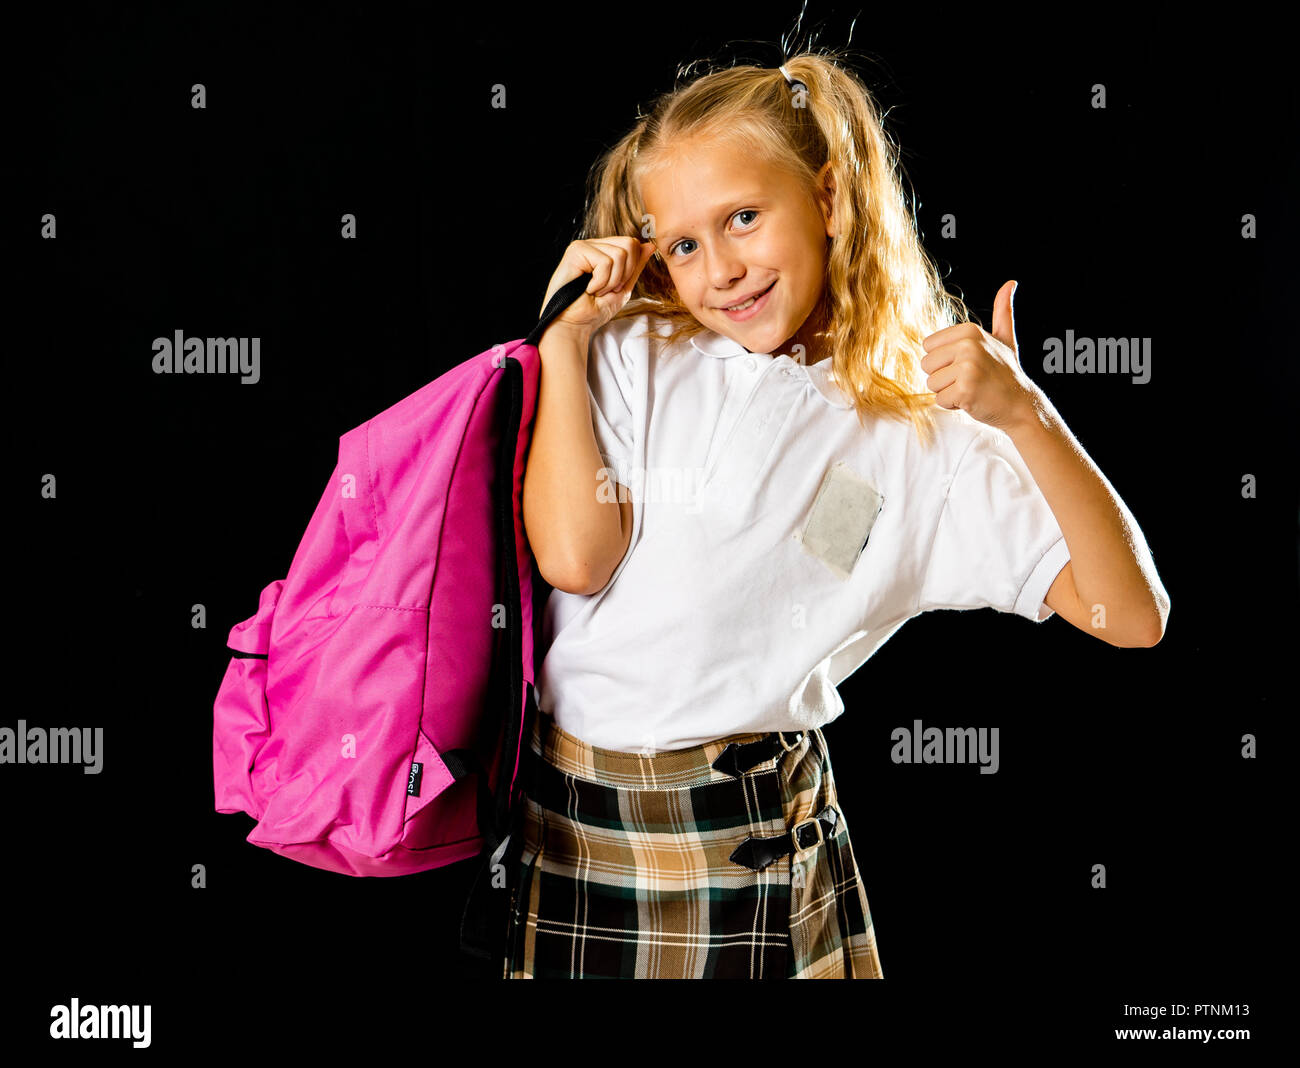 Pretty Cute Blonde Hair Girl With A Pink Schoolbag Looking At